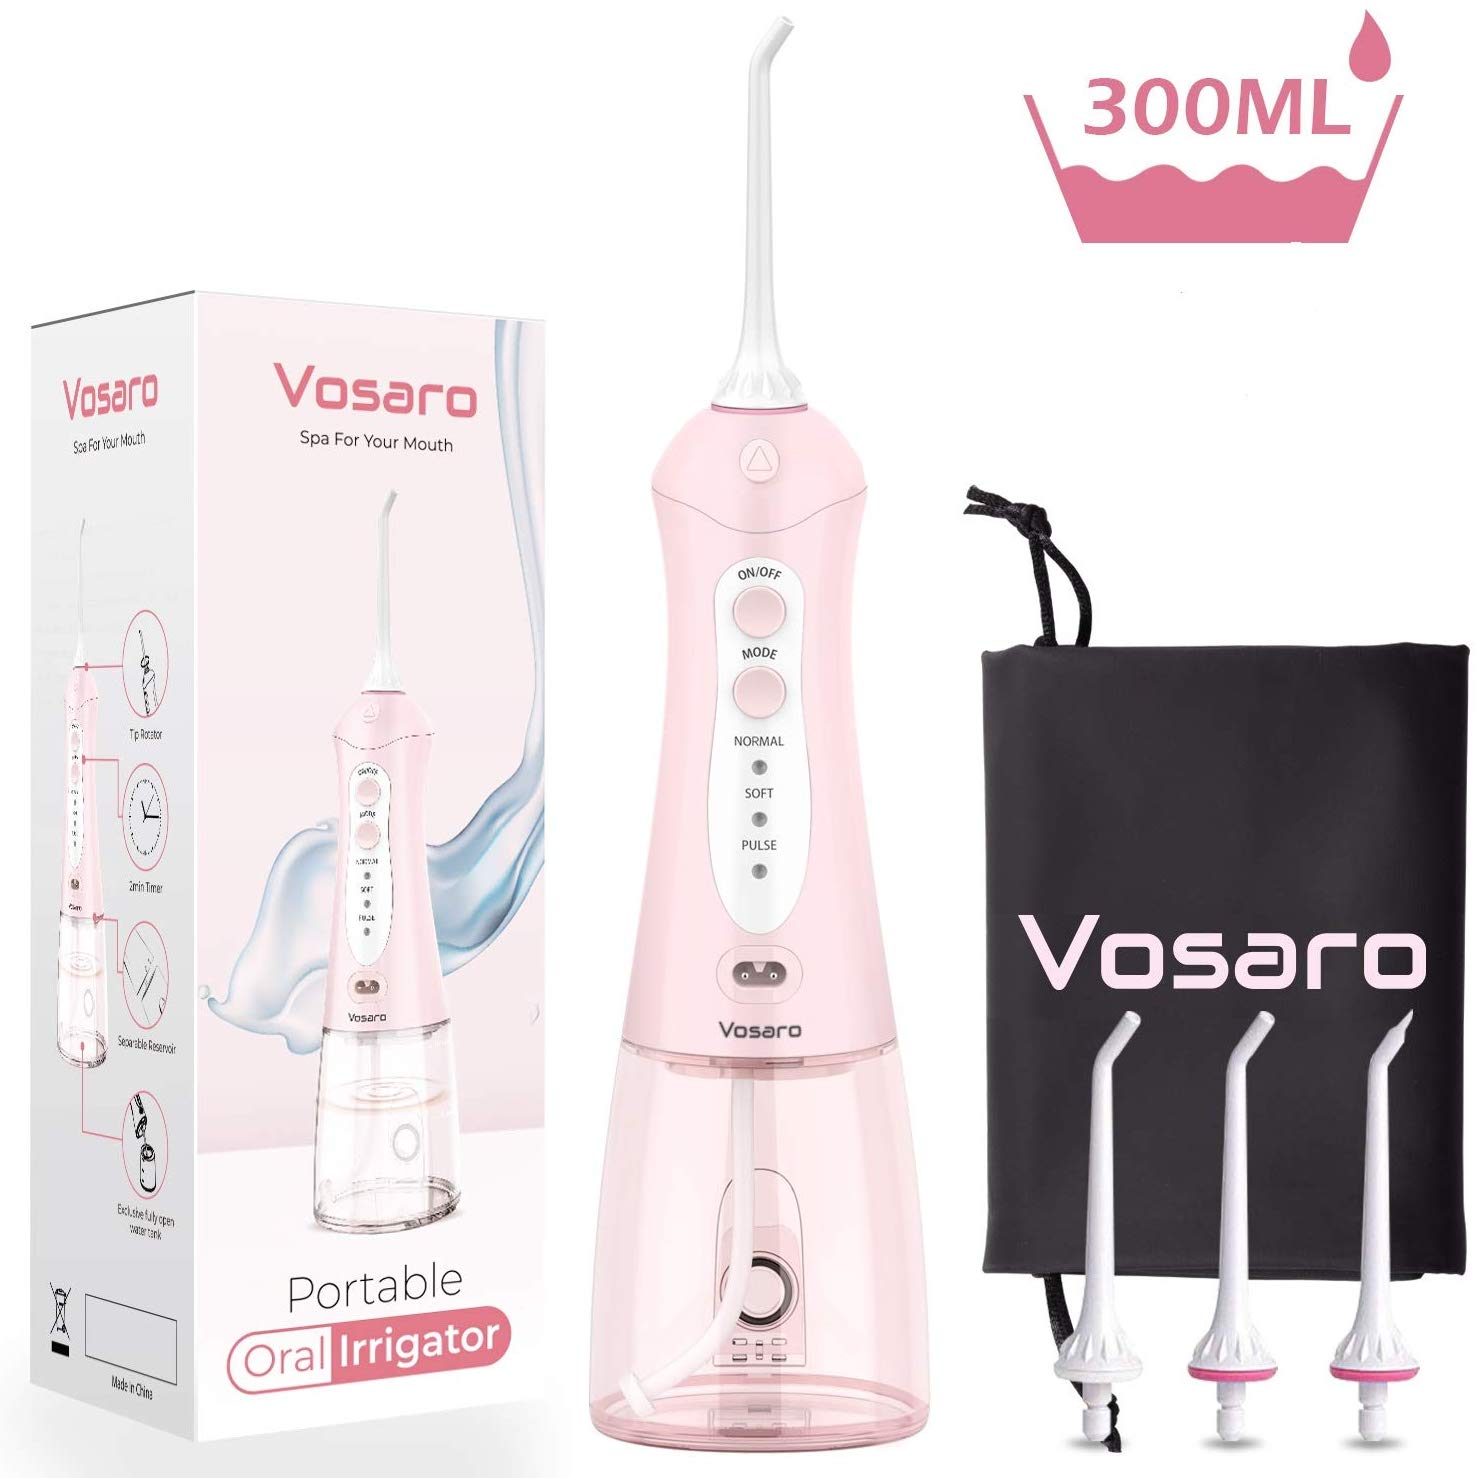 Cordless Water Flosser For Teeth 300ML, Portable Oral Irrigator Travel